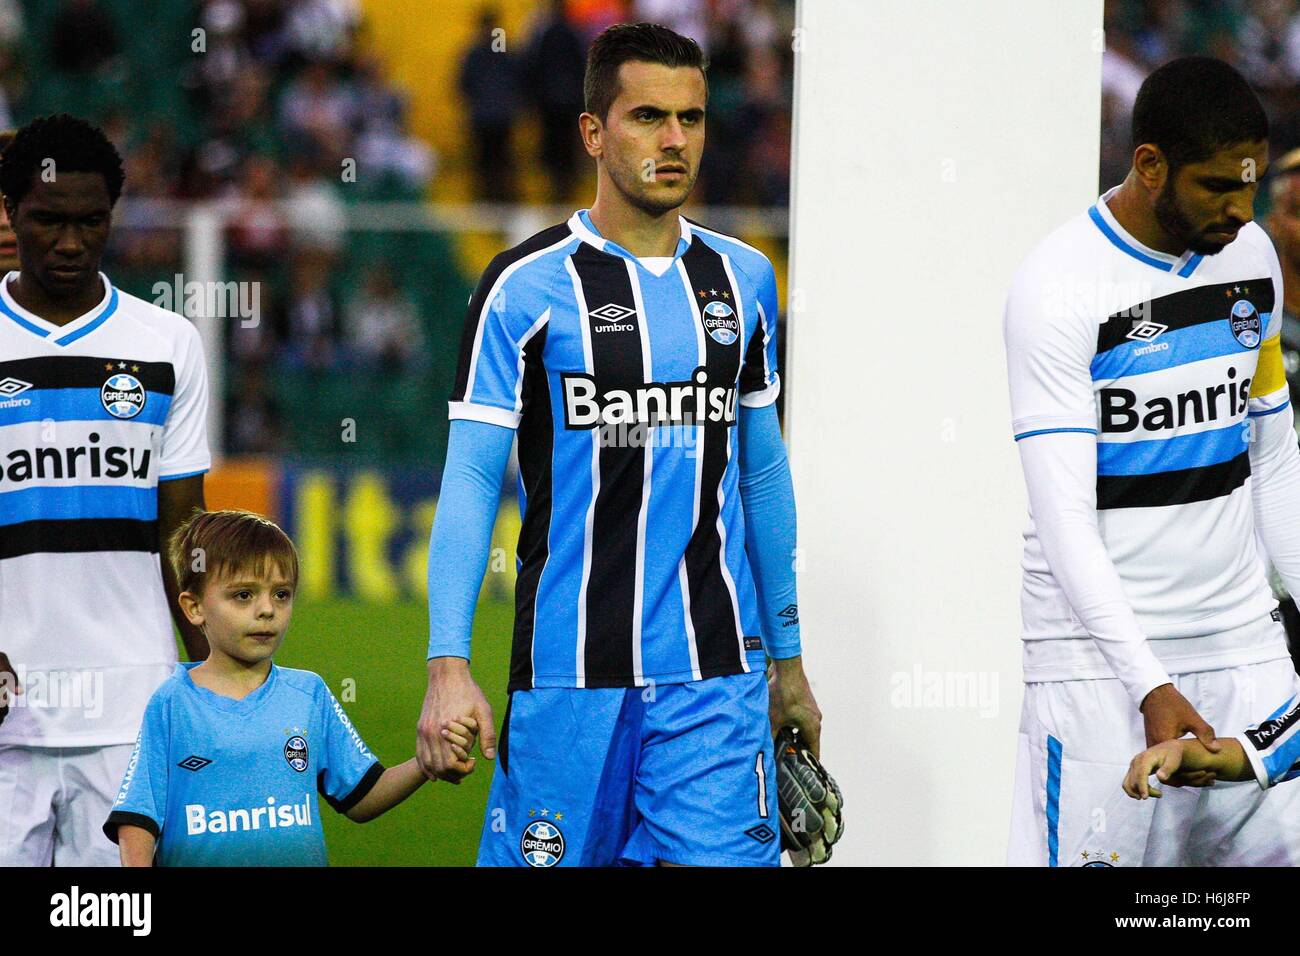 FLORIAN'POLIS, SC - 29.10.2016: FIGUEIRENSE X GRÊMIO - Marcelo Grohe returning to Gremio&#39oal in thn the match today before the Figueirense by the Brazilian Serie A. (PhoEmanuel Galafassi/Fotoarena)ena) Stock Photo